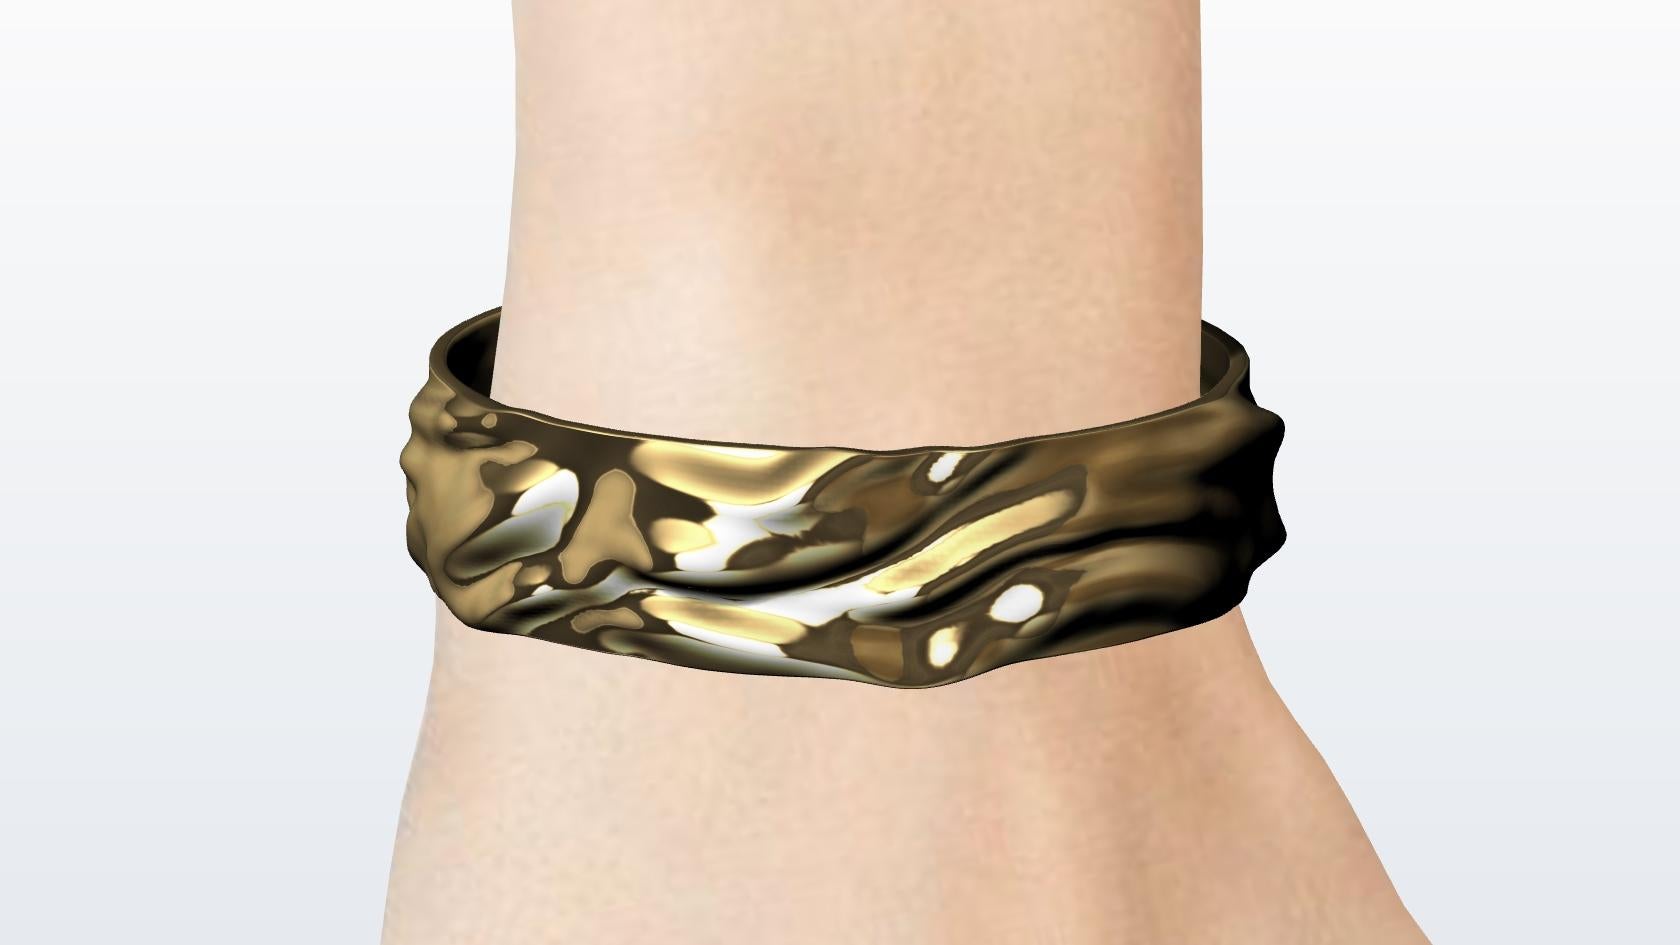 14 Karat Yellow Gold Soft Waves Cuff Bracelet, Tiffany designer, Thomas Kurilla Welcomes the new Light , Water, Mind Collection. Getting 2 herniated discs in 2018 , and the discovery of Cyrotherapy in 2020. The injury became an inspiration from cold